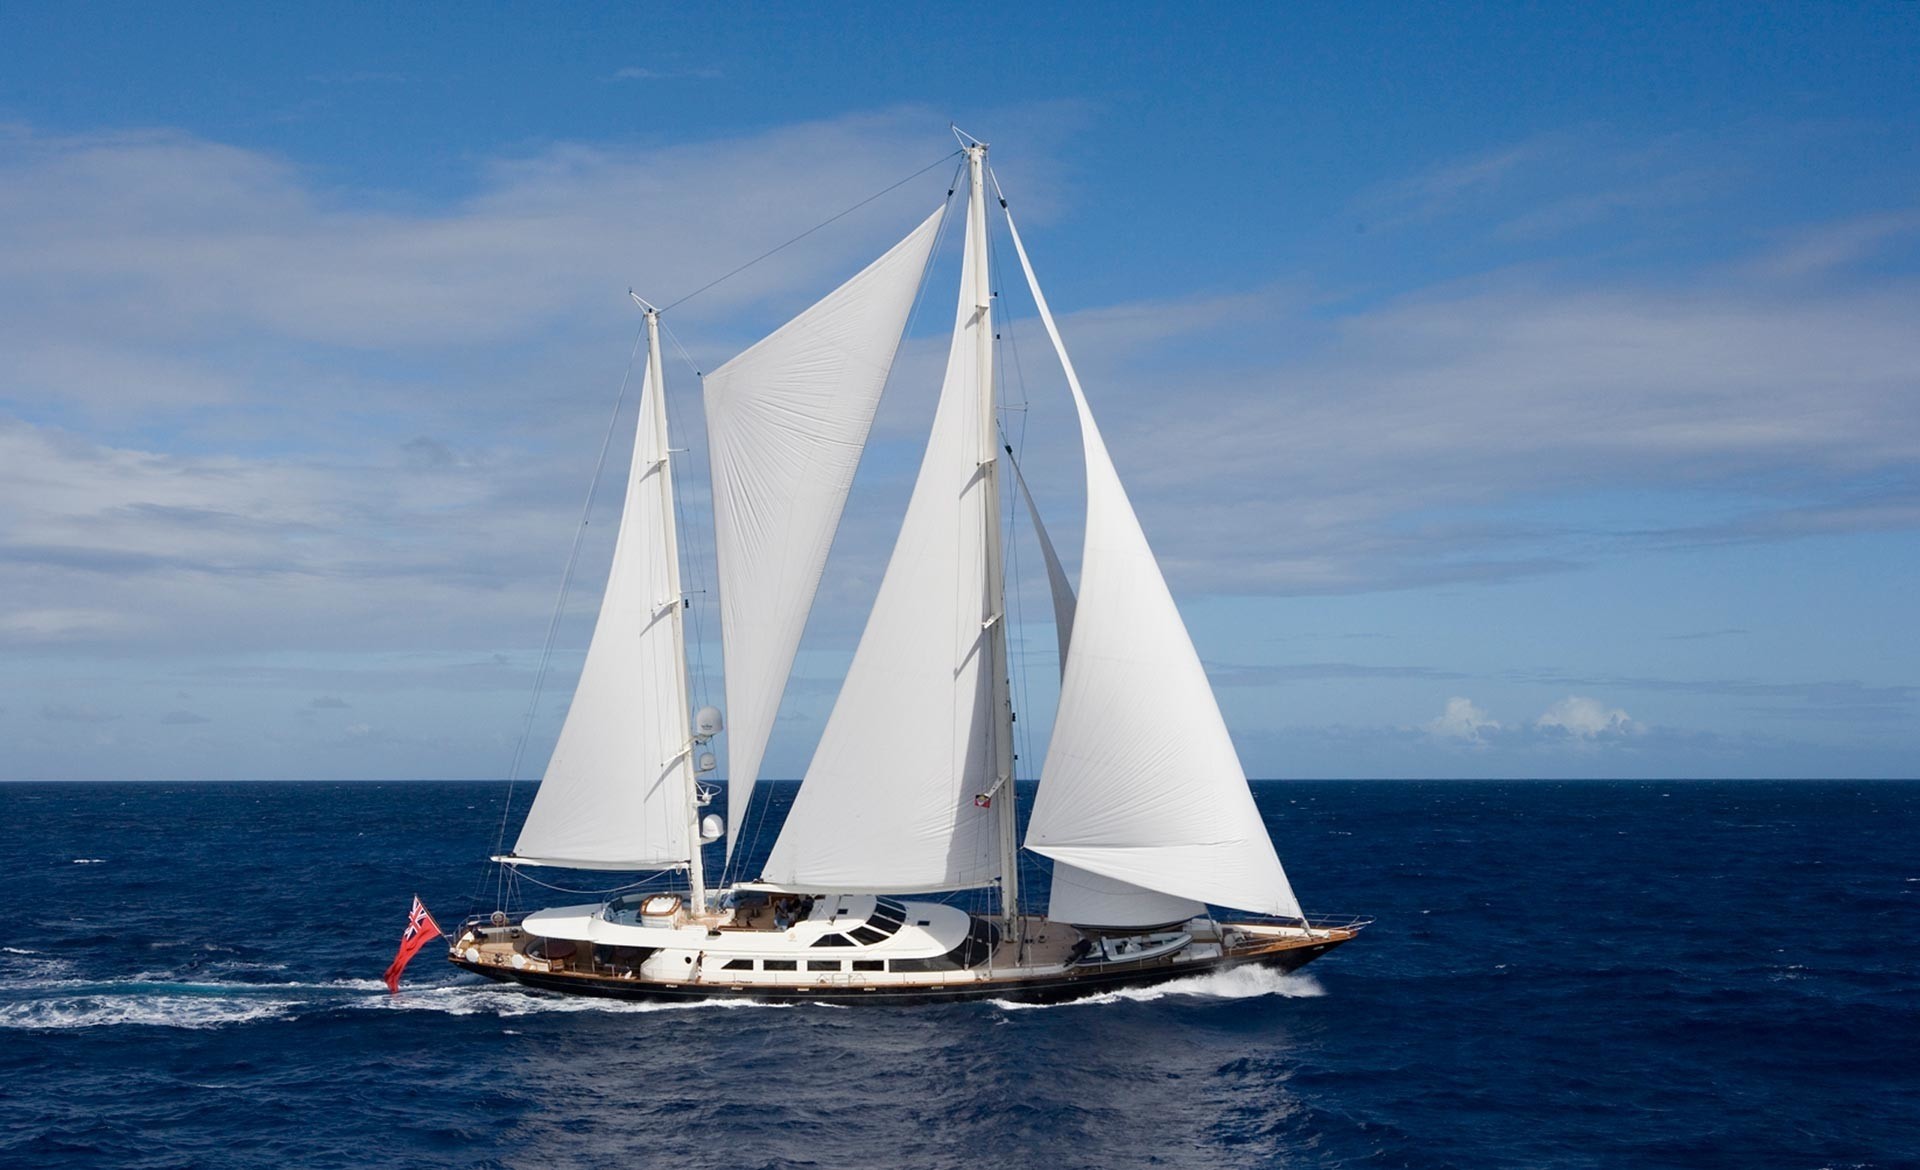 Overview: Yacht ANTARA's Cruising Pictured